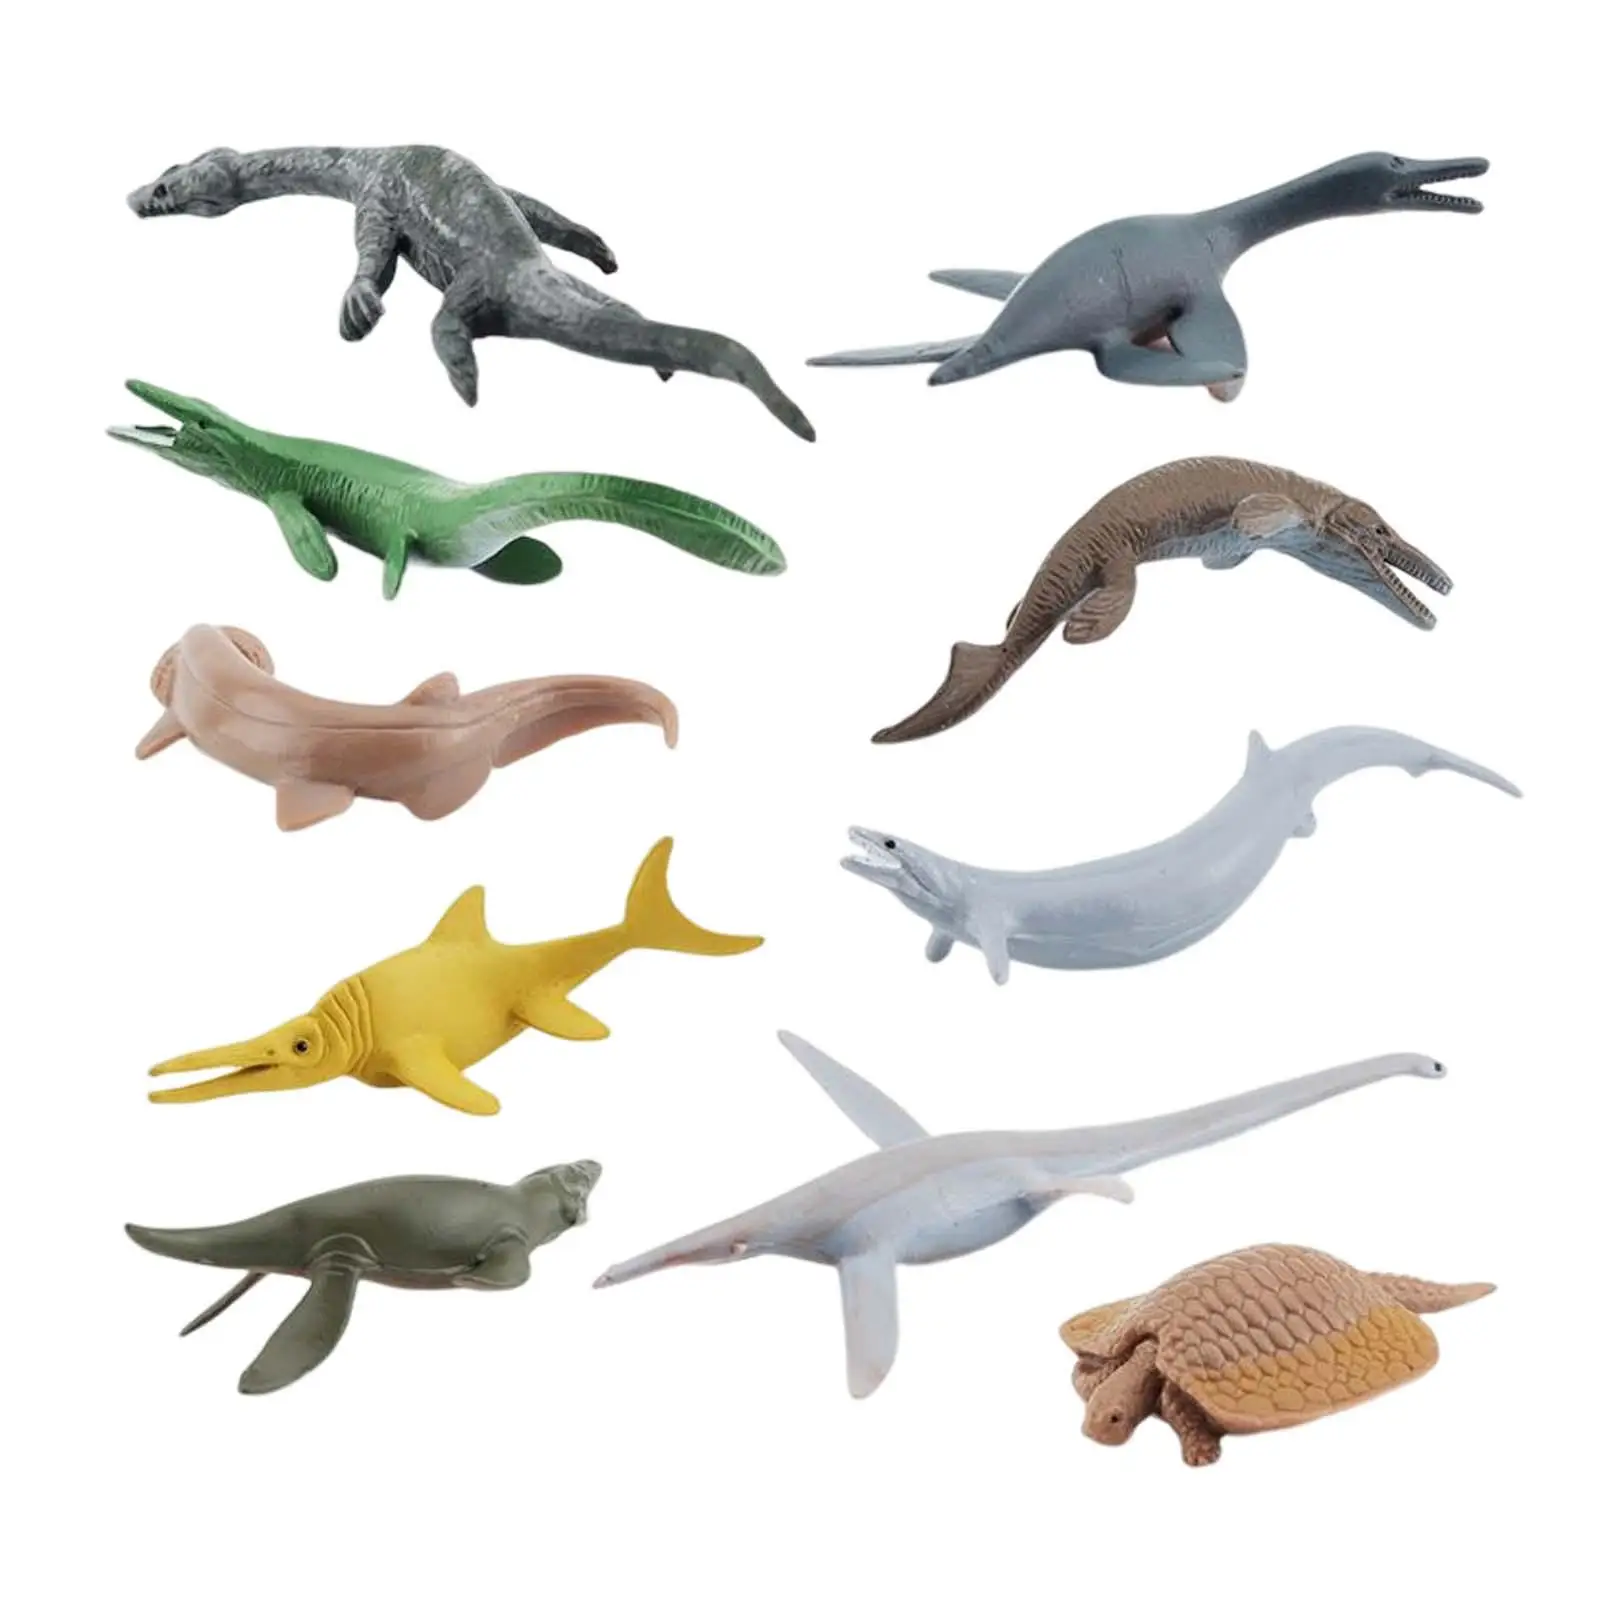 

Marine Animal Model Ancient Statues Playset Teaching Prop Ornaments Lifelike Education Decor Toy Set for Kindergarten Toddlers